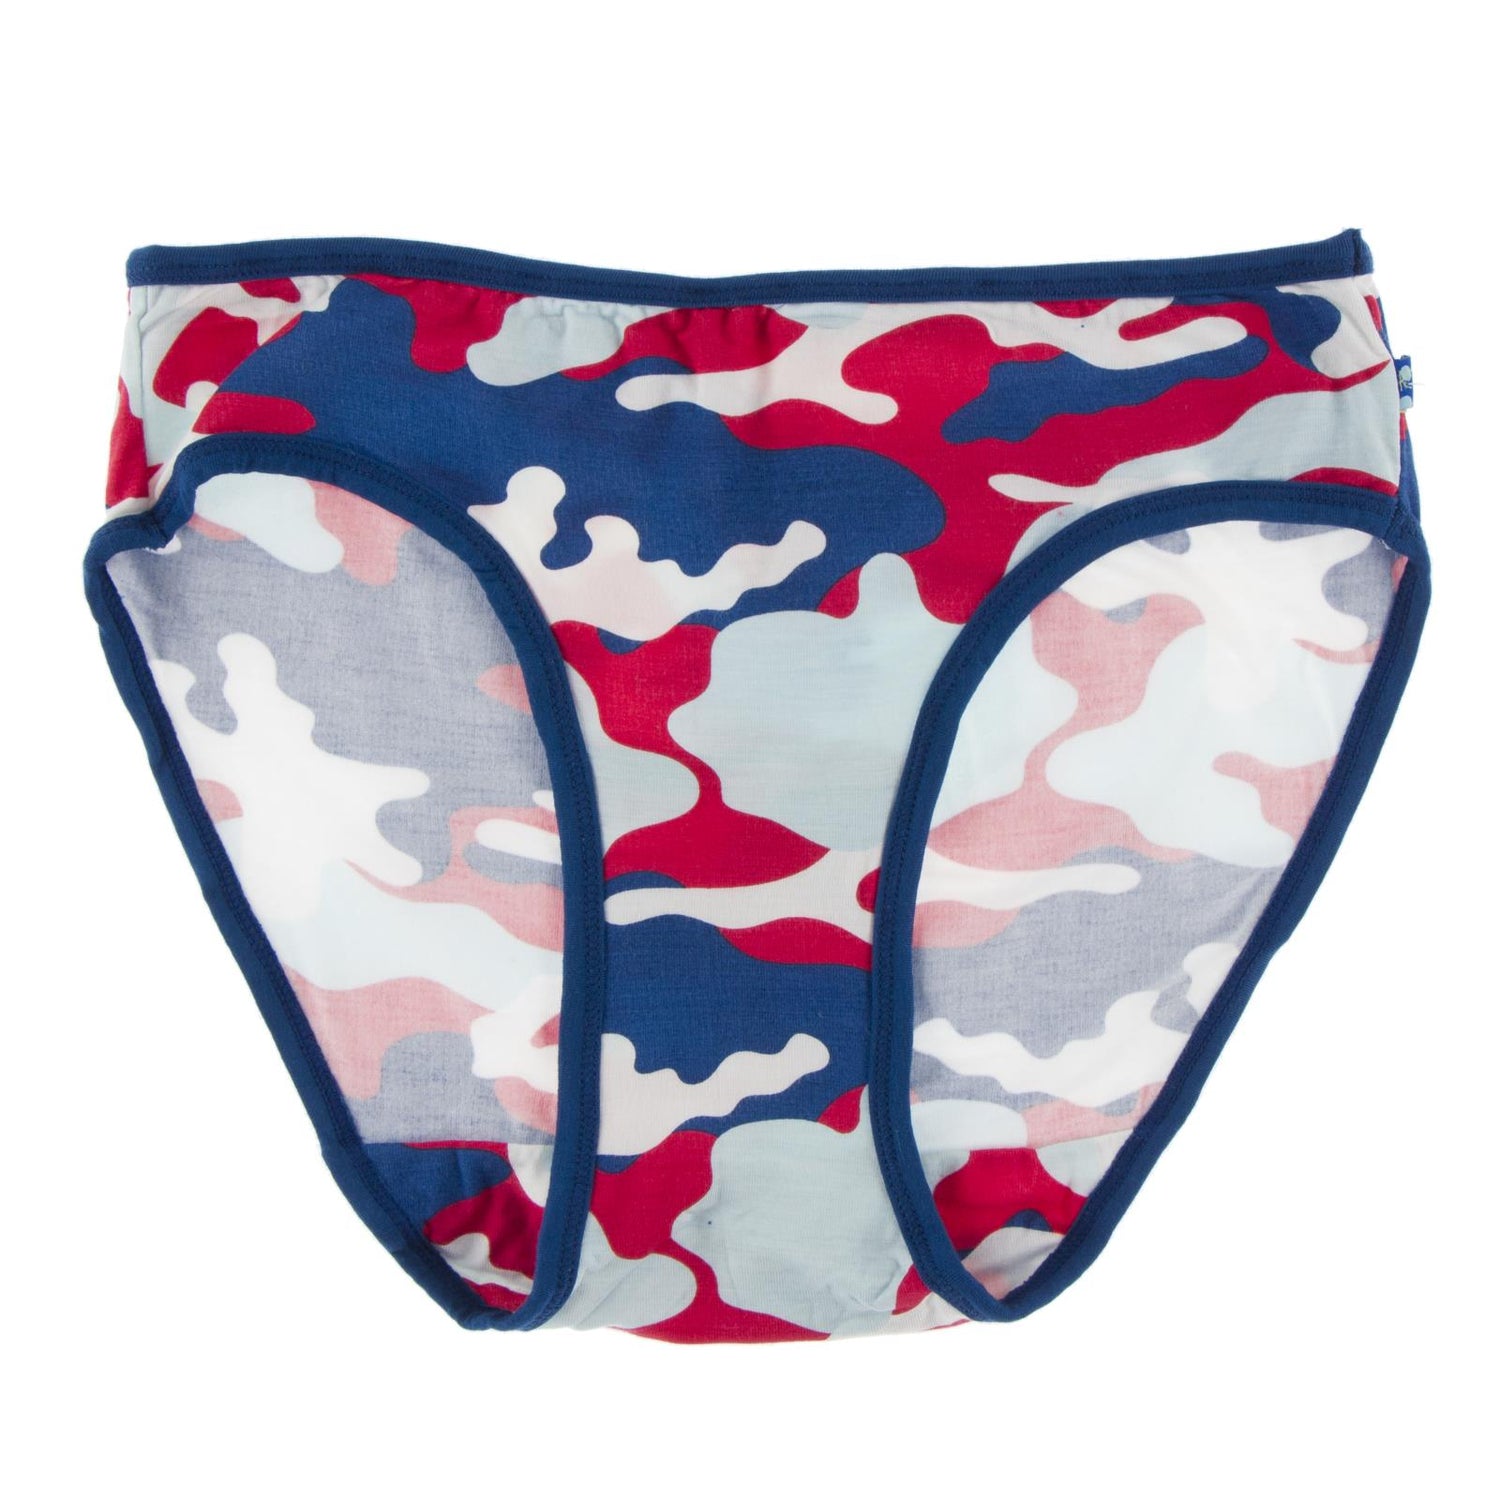 Print Underwear in Flag Red Military with Navy Trim